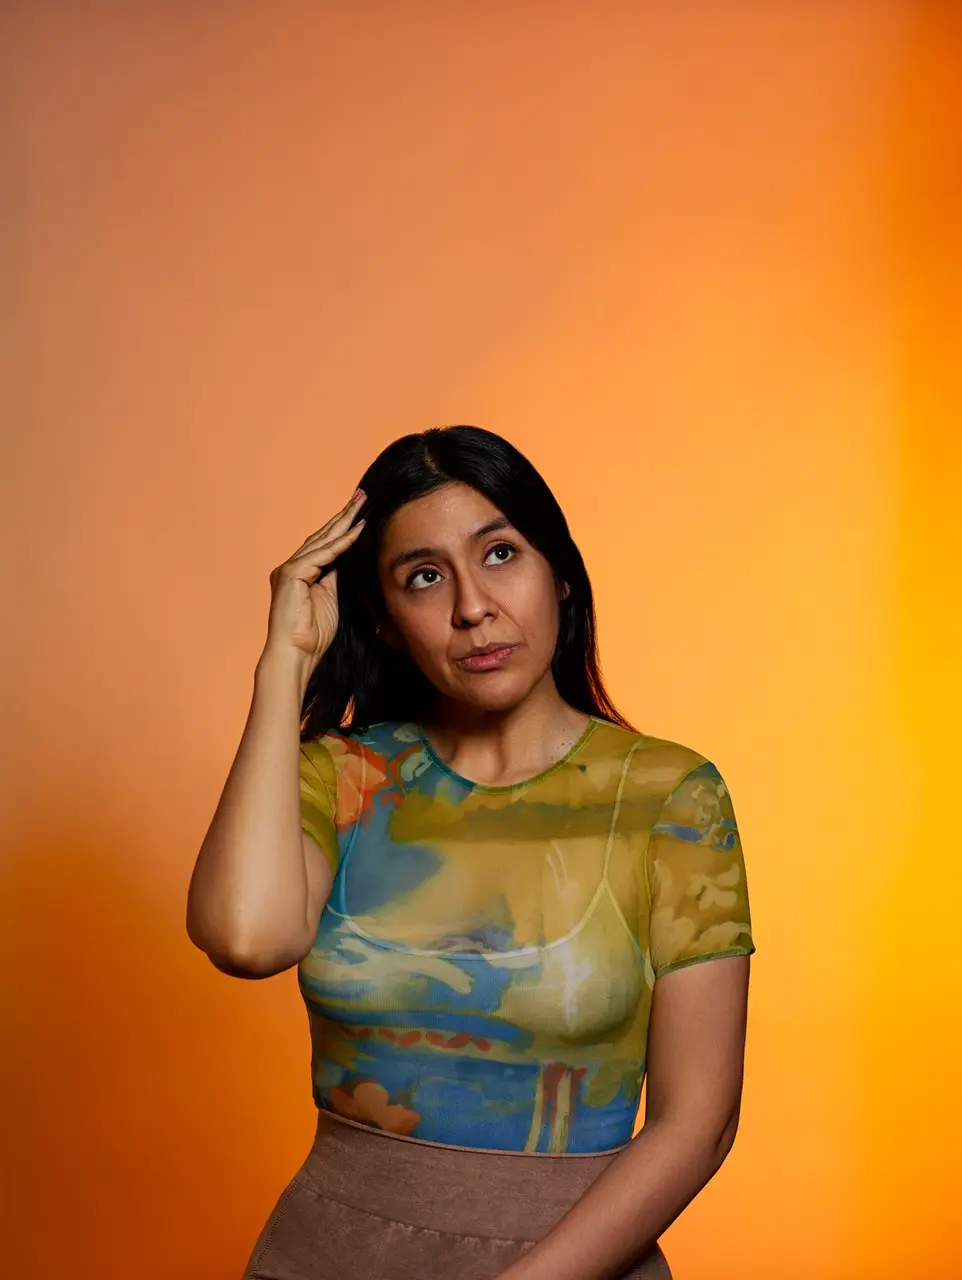 Portrait photo of Maria with long black hair and orange background, wearing partially see-through printed shirt, looking upwards with mischeavous smile.